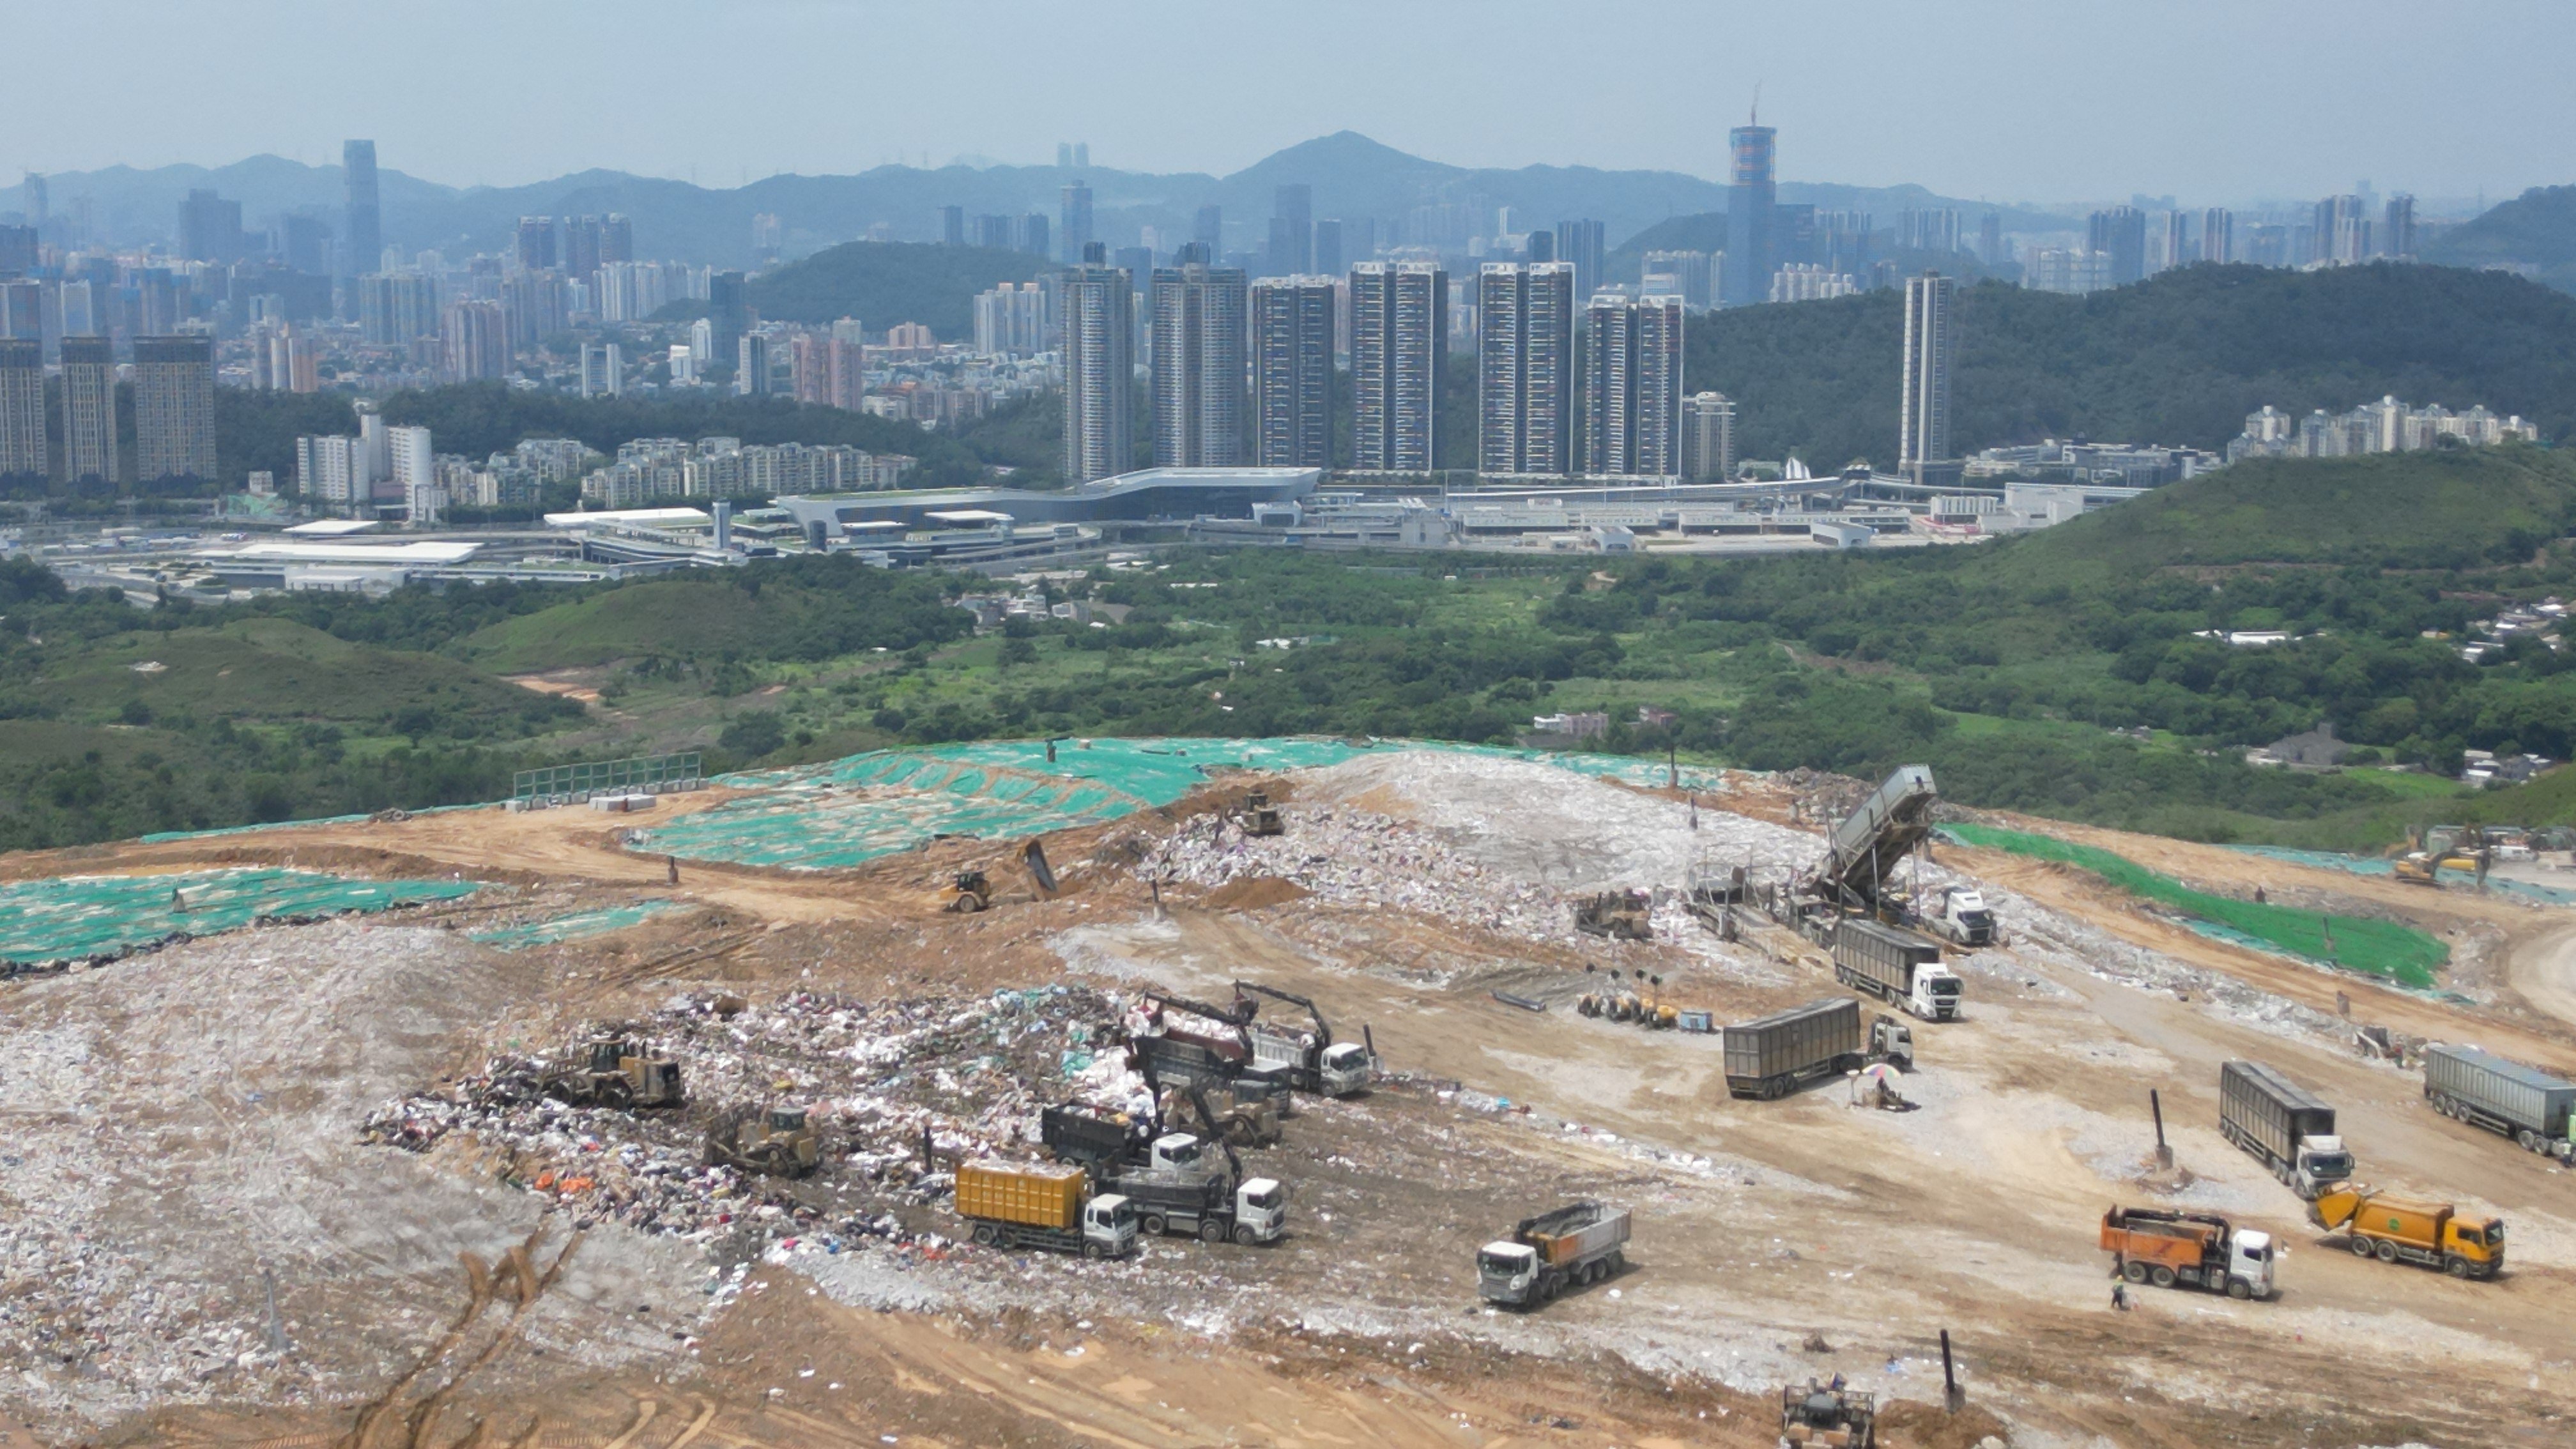 Authorities ordered contractor of North East New Territories Landfill to stop using a garbage tipper after worker’s death. Photo: Felix Wong